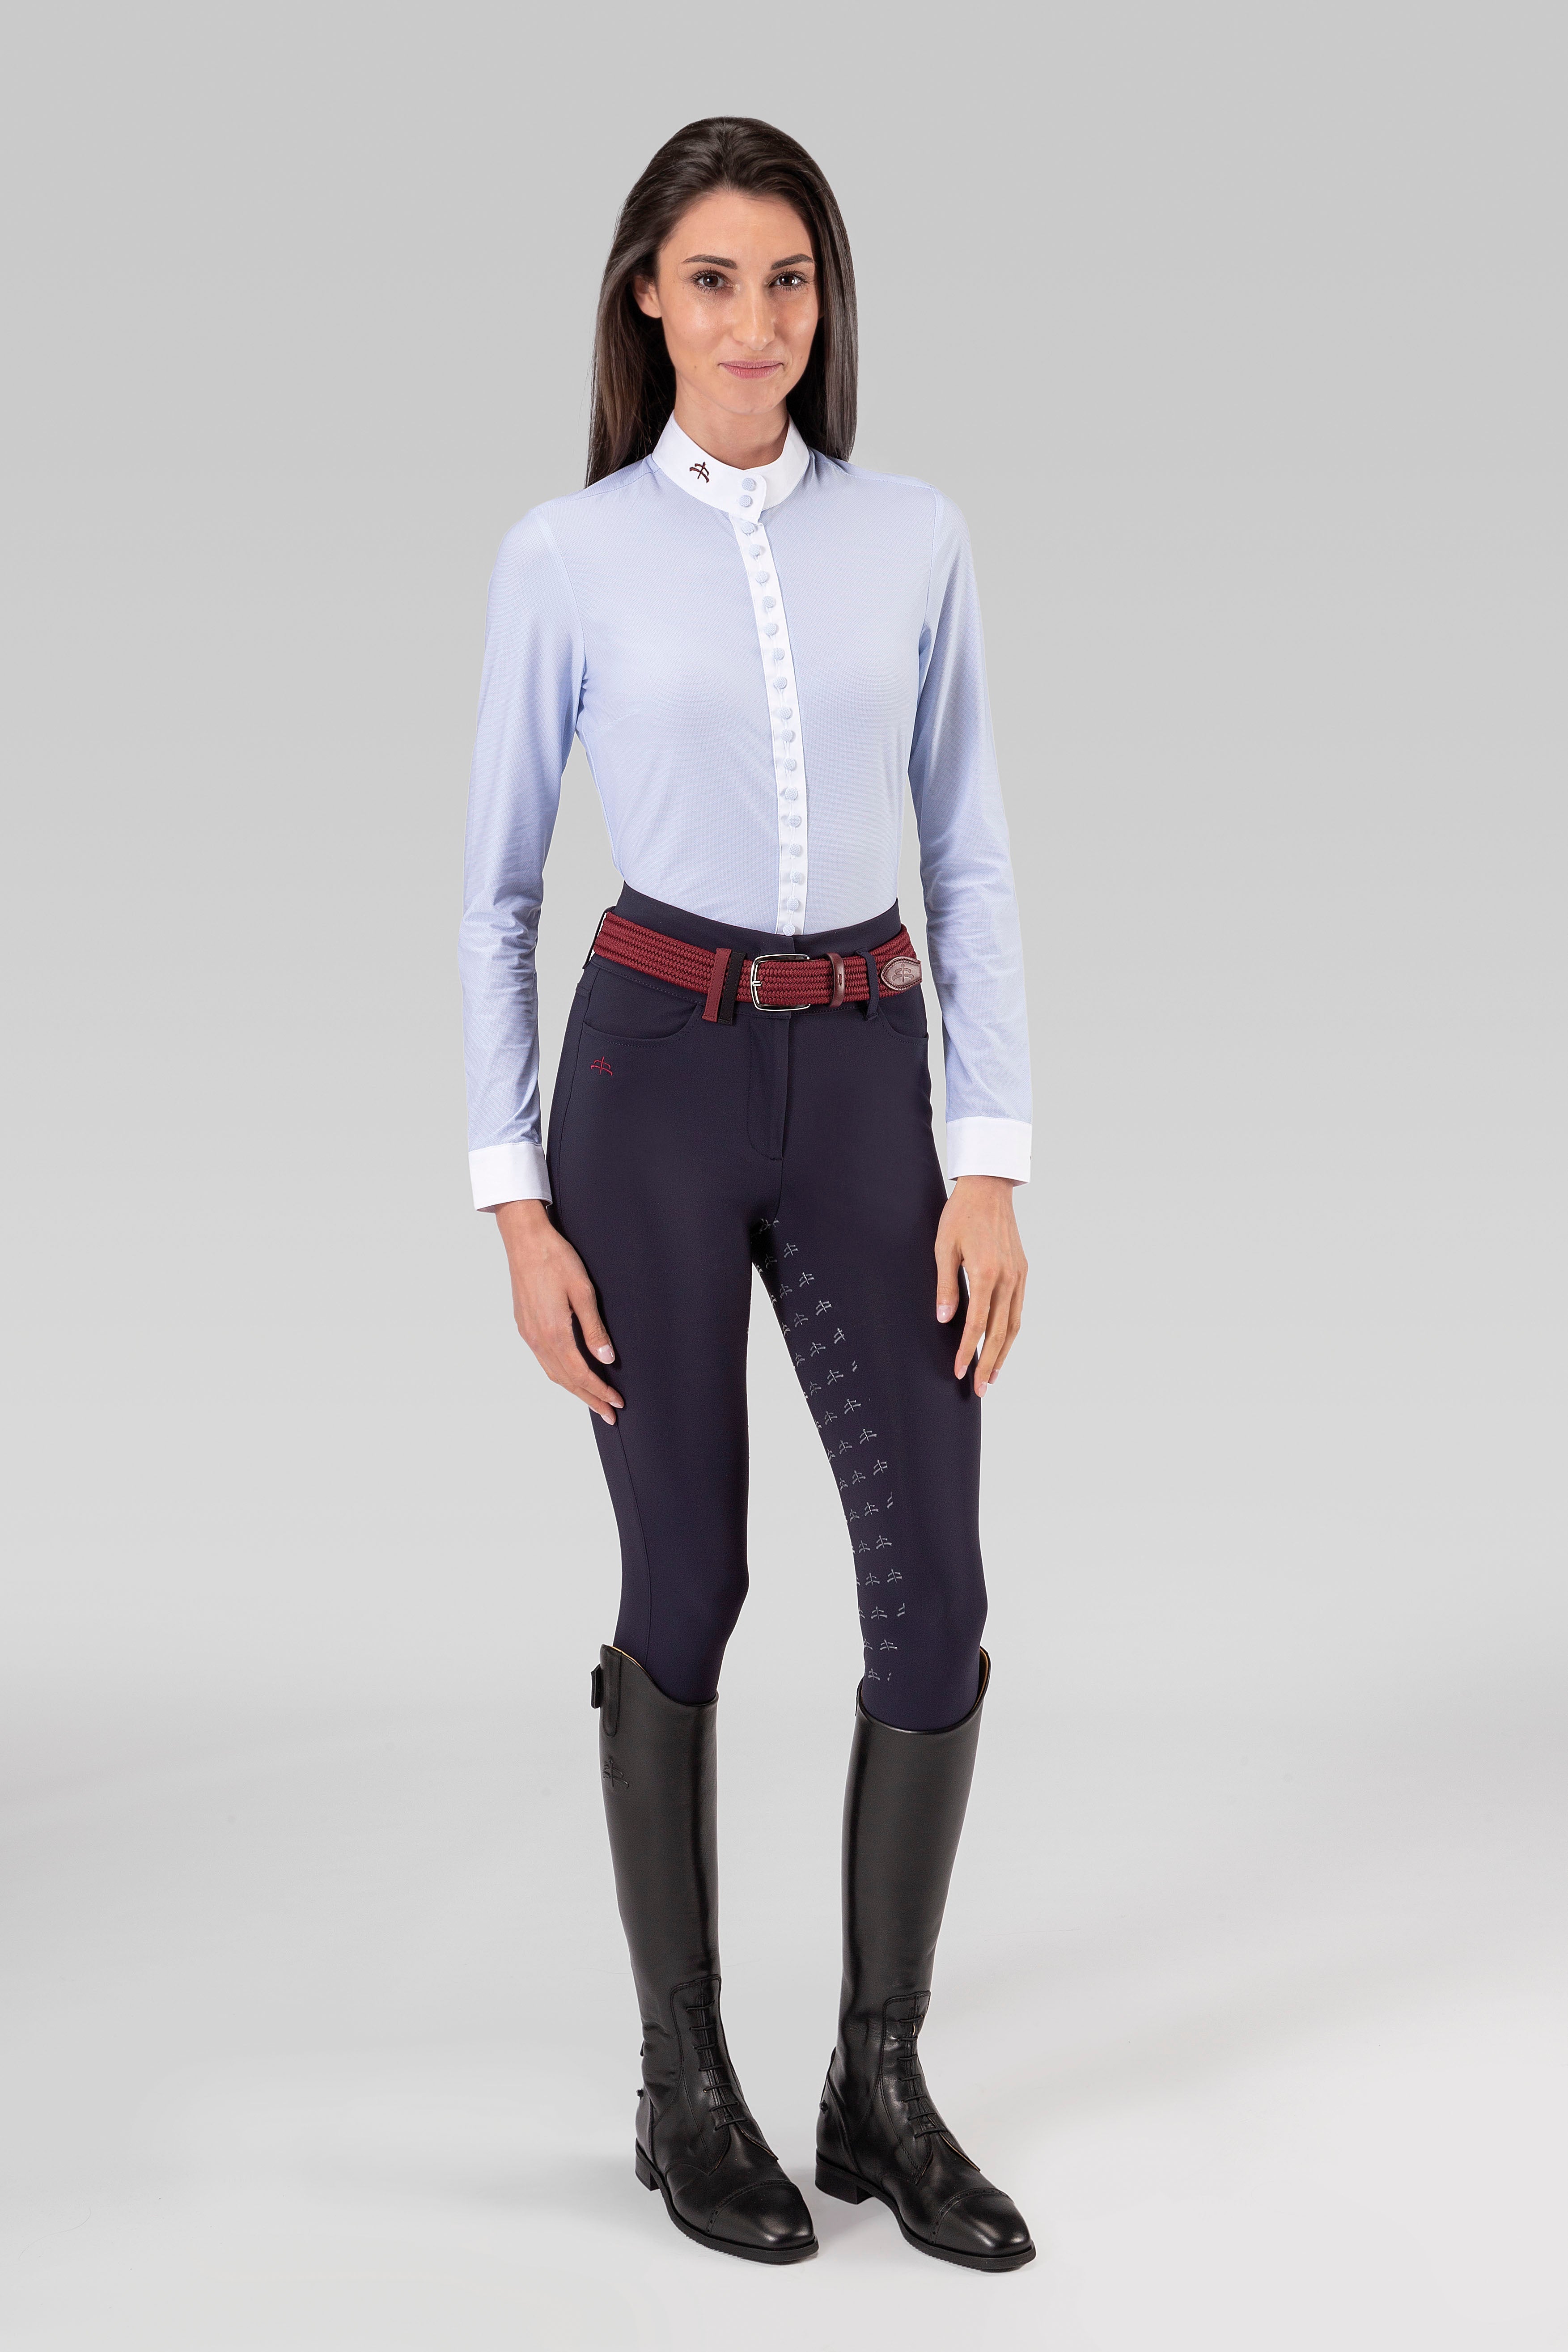 Makebe Italy Ladies Long Sleeve Dafne Show Shirt - Equiluxe Tack